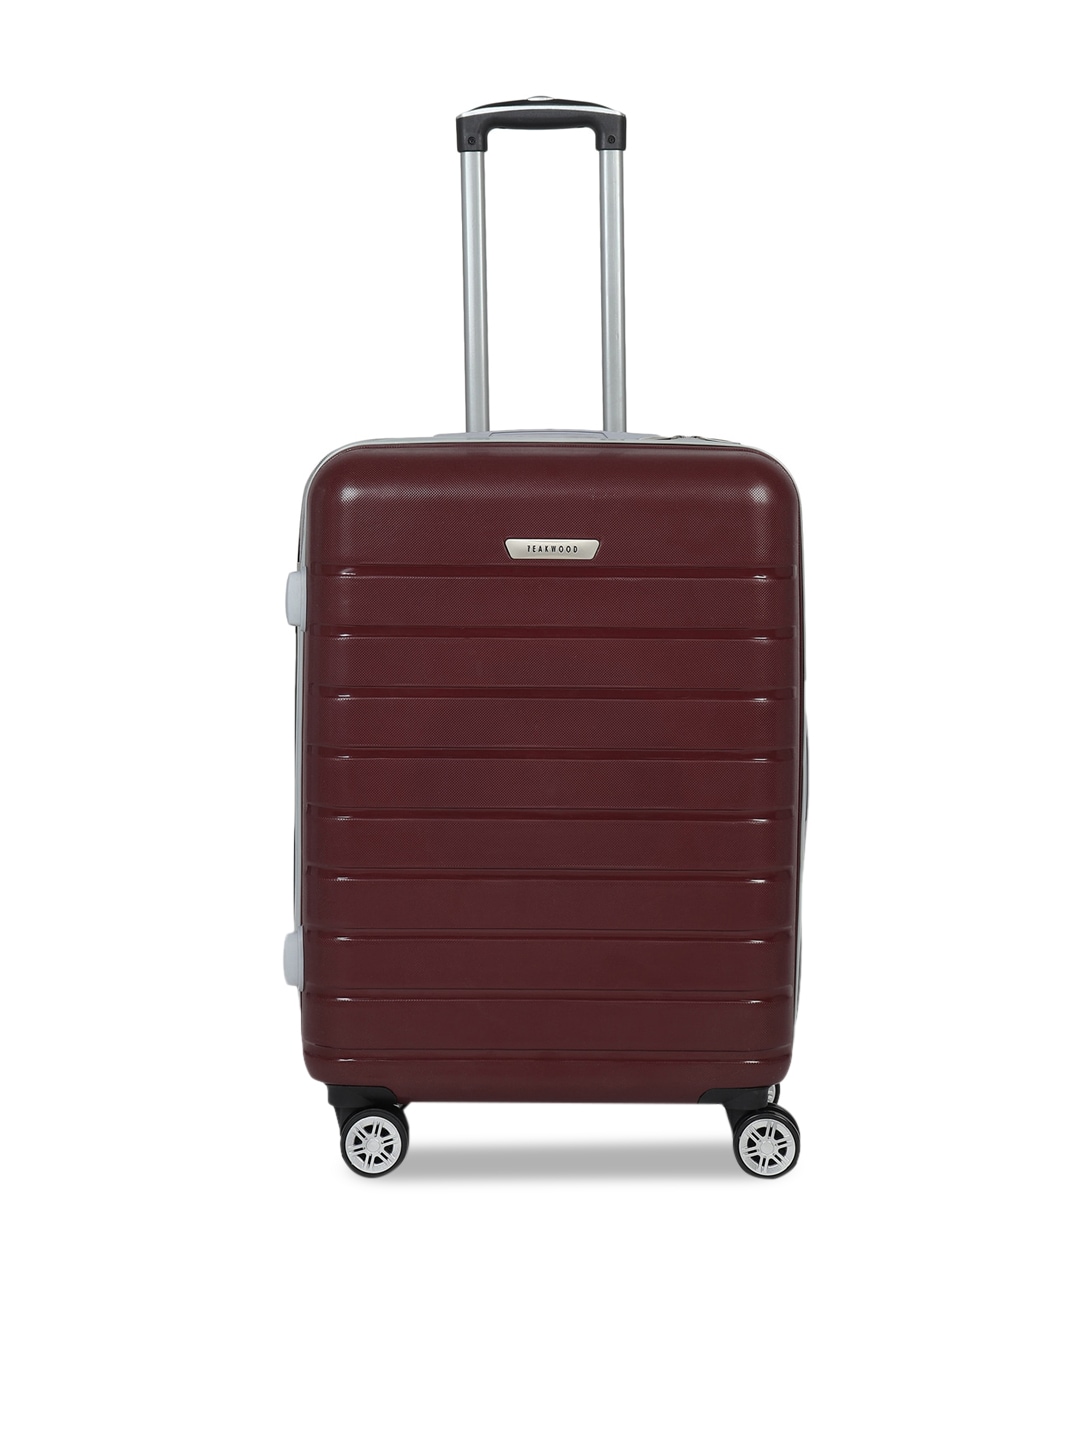 Teakwood Leathers Brown Textured Hard-Sided Medium Trolley Suitcase Price in India